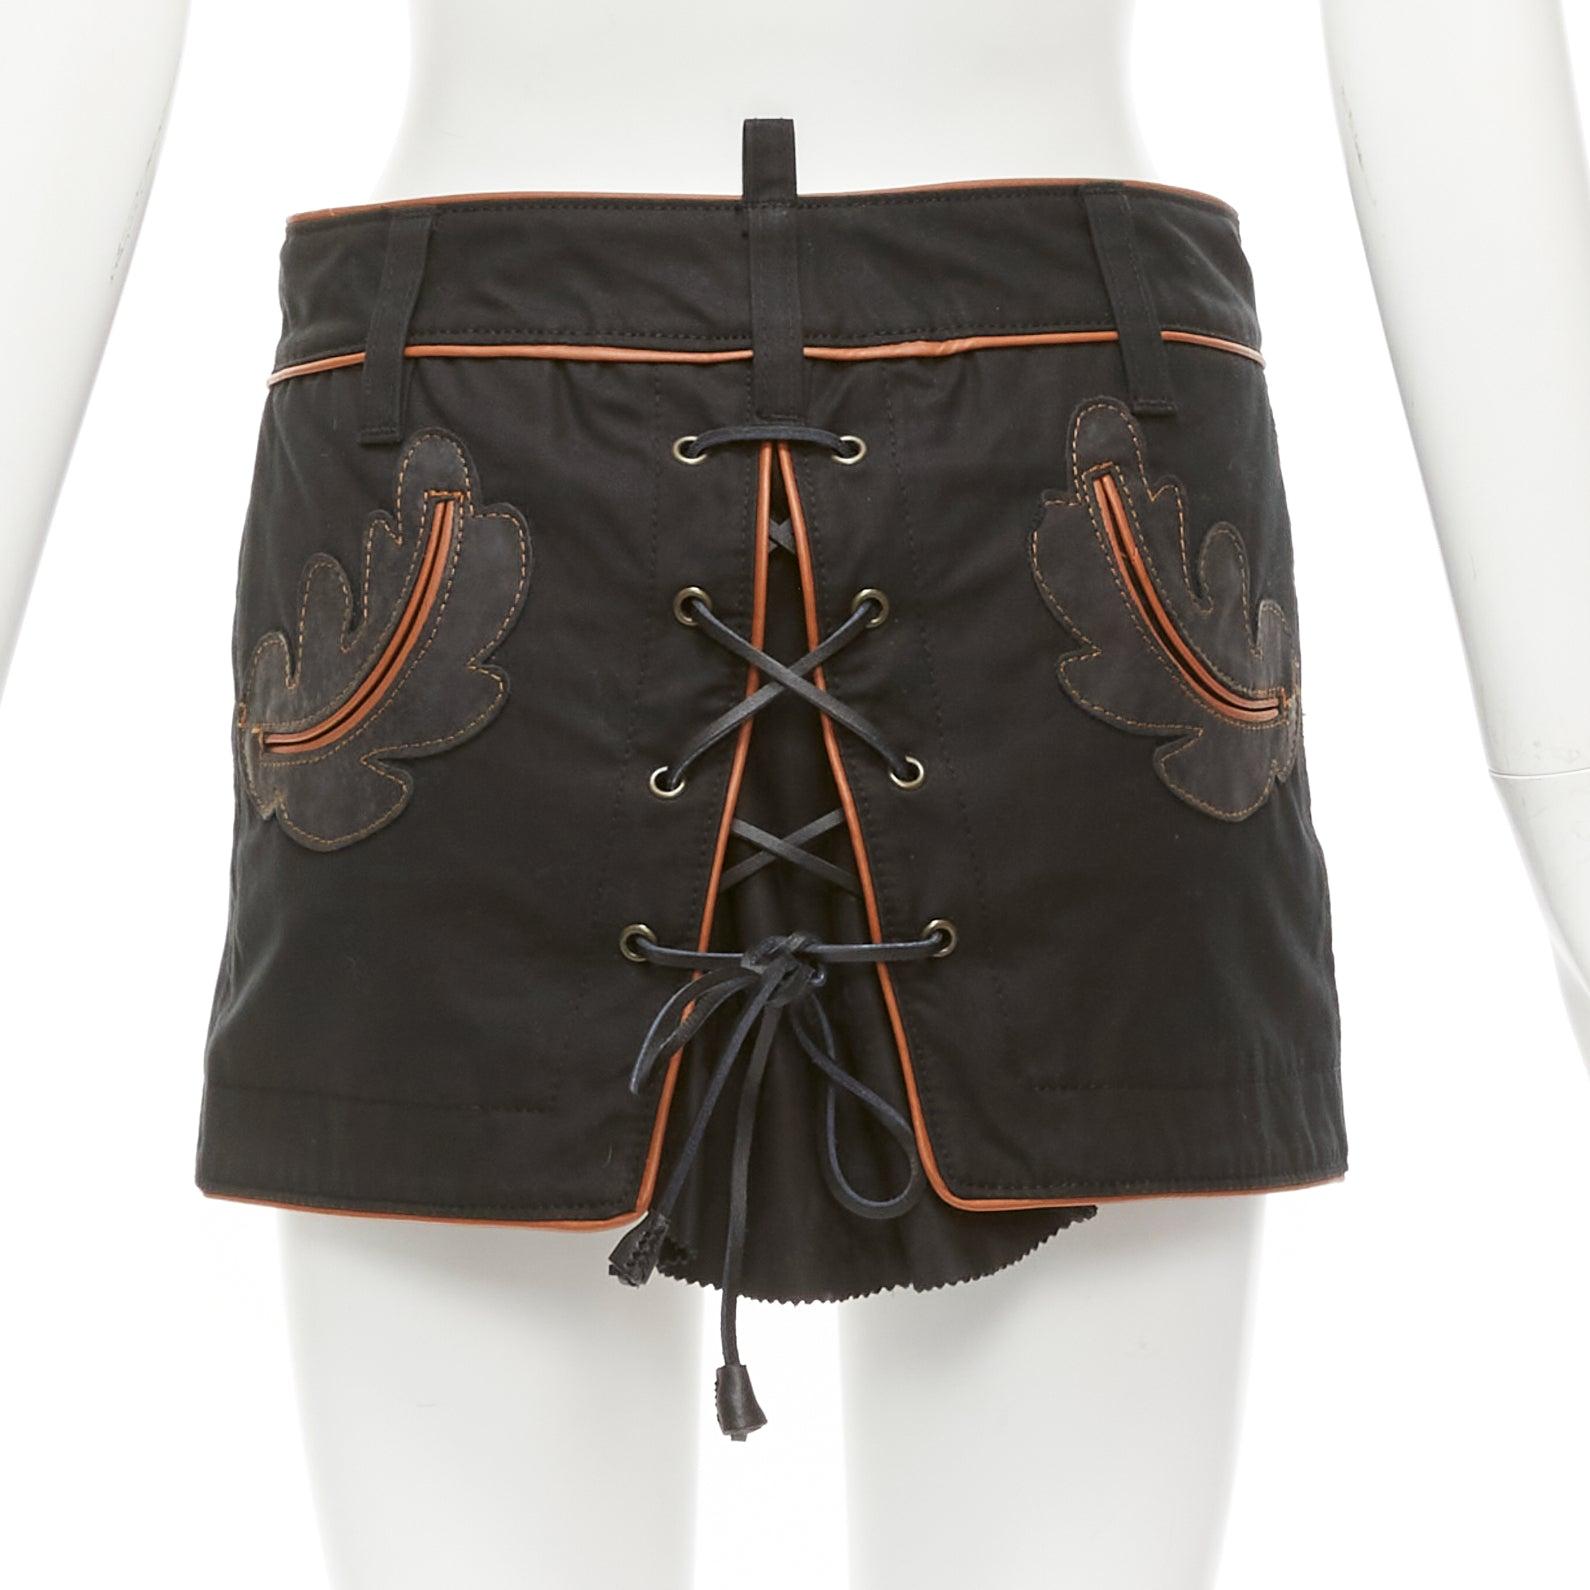 DSQUARED2 black leather western detail lace up back mini skirt IT40 S
Reference: ANWU/A01173
Brand: Dsquared2
Material: Feels like cotton, Leather
Color: Black, Brown
Pattern: Floral
Closure: Zip Fly
Lining: Black Fabric
Extra Details: Zip fly with